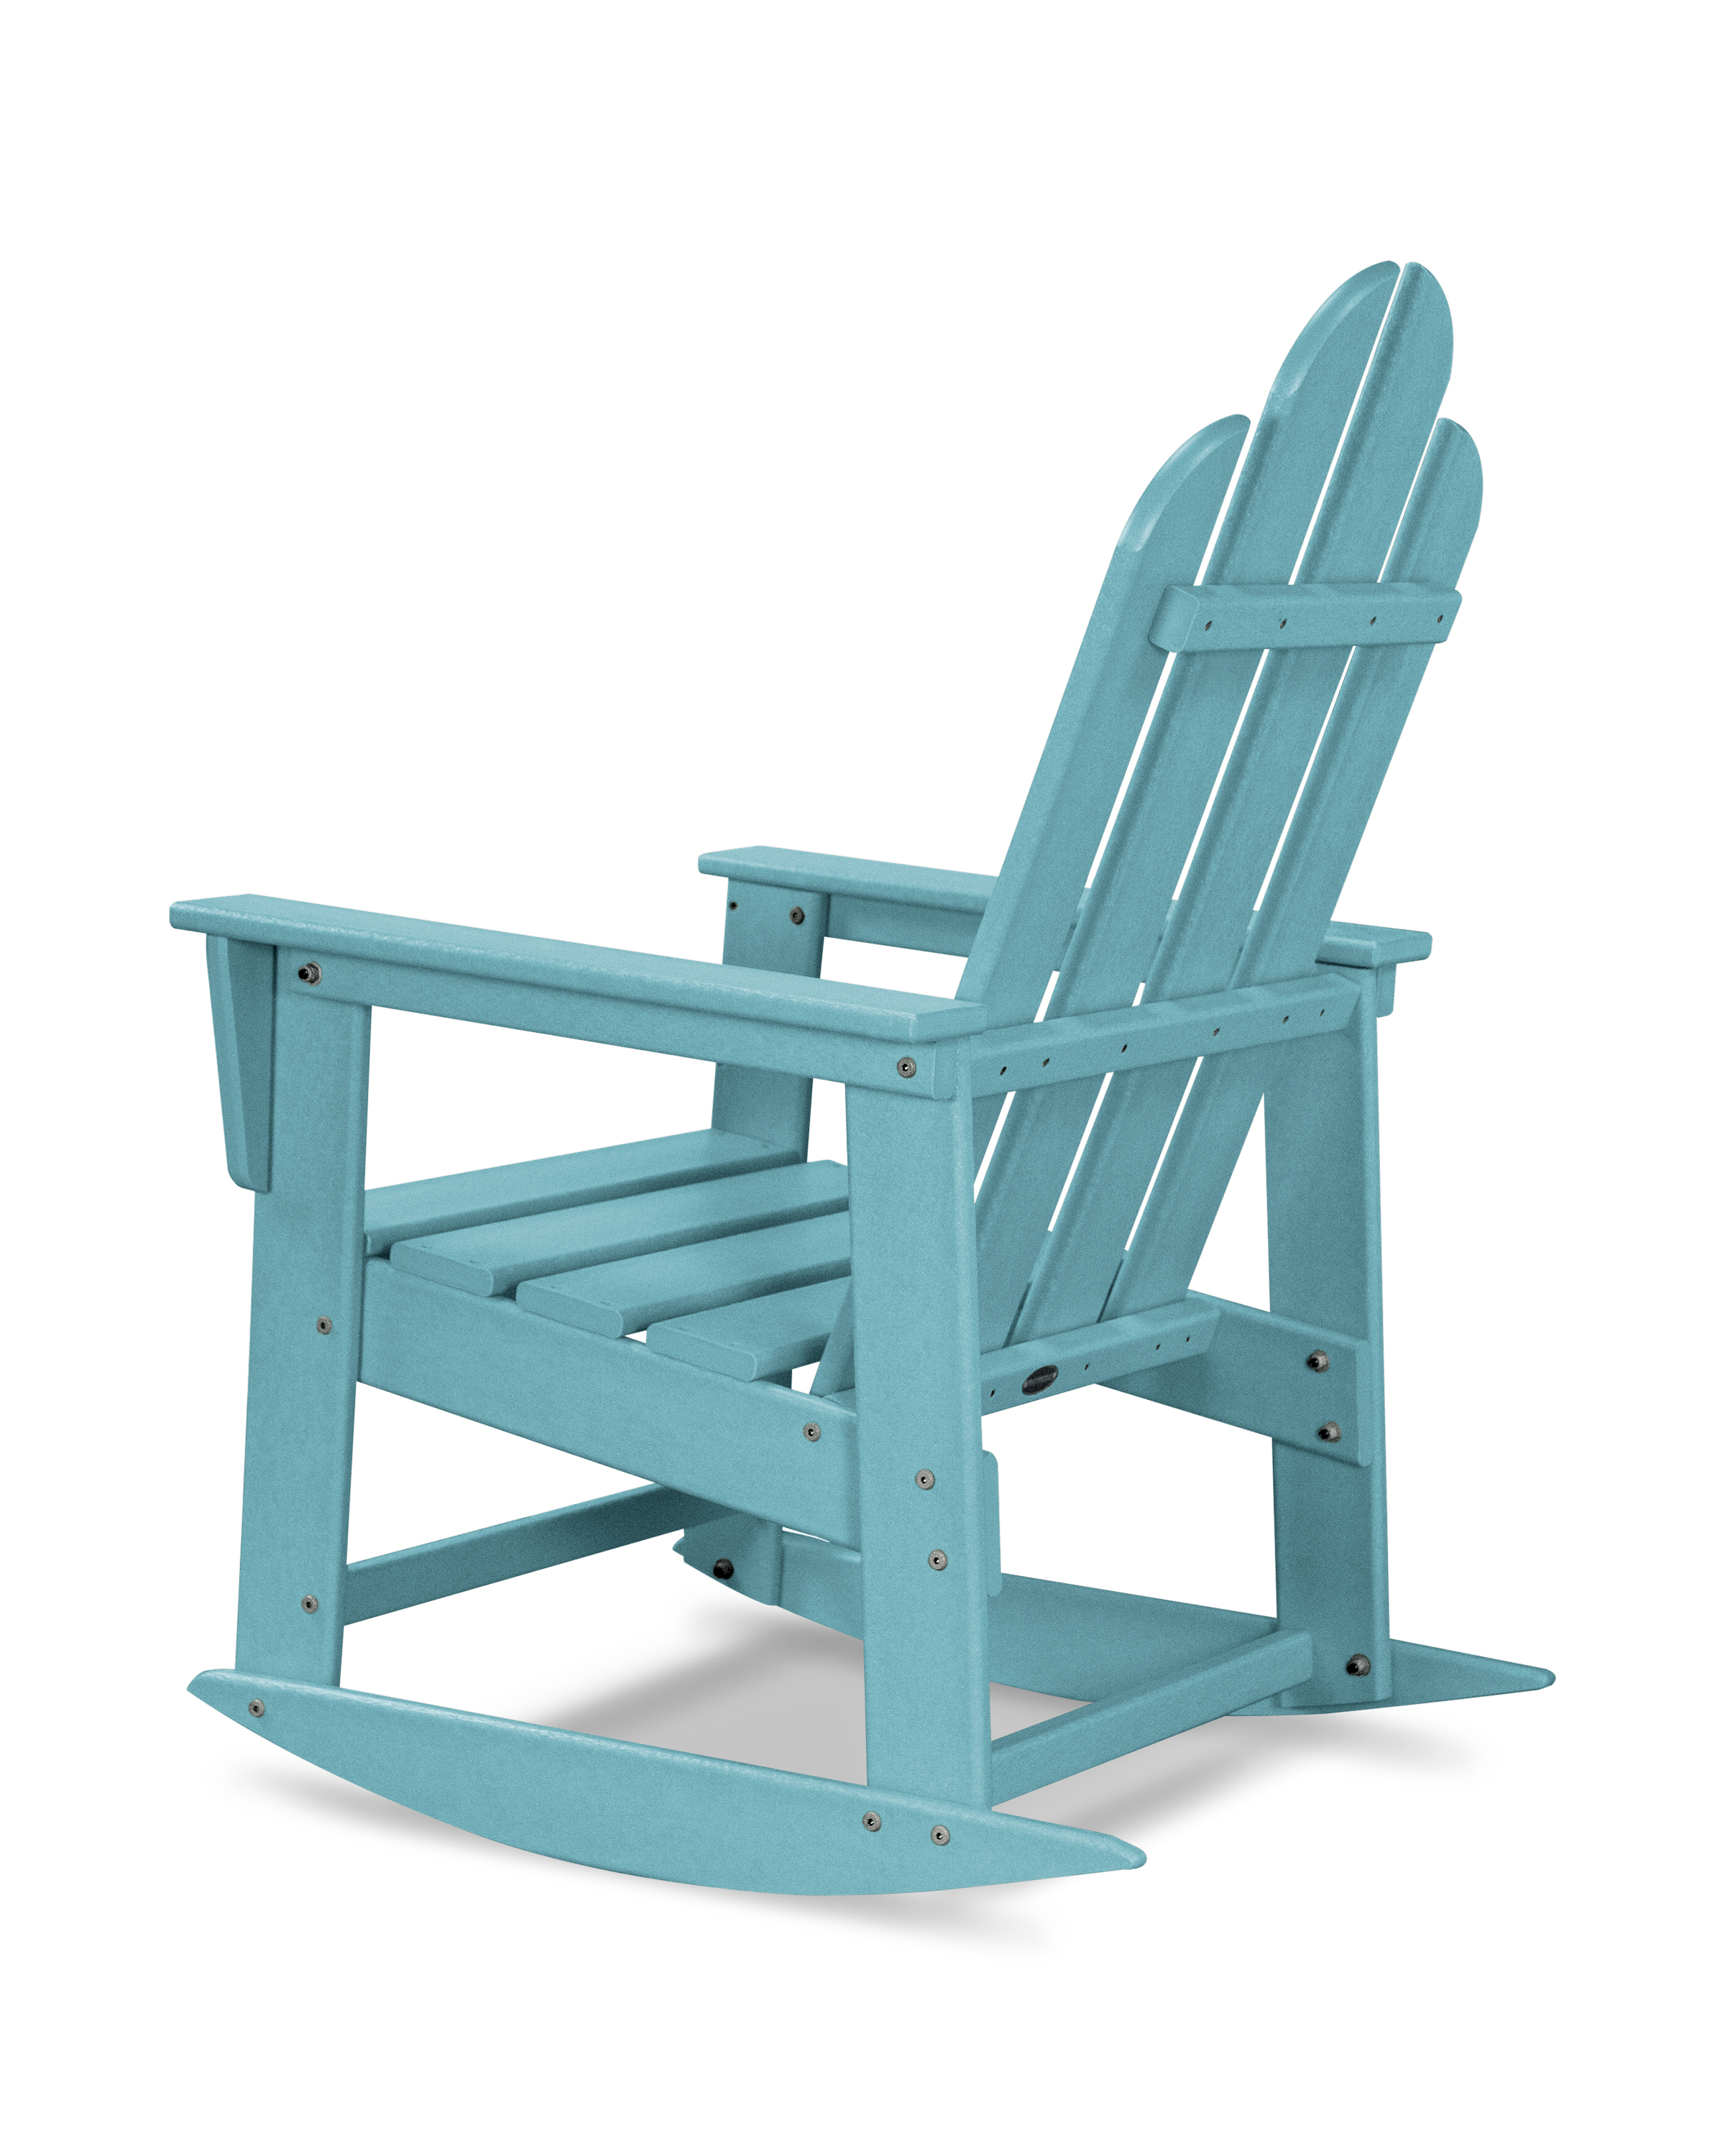 This Cozy Rocker Is The Perfect Place To Sit Back And Dream Of A Summer Day In New England. Polywood Furniture Is Constructed Of Solid Polywood Lumber That